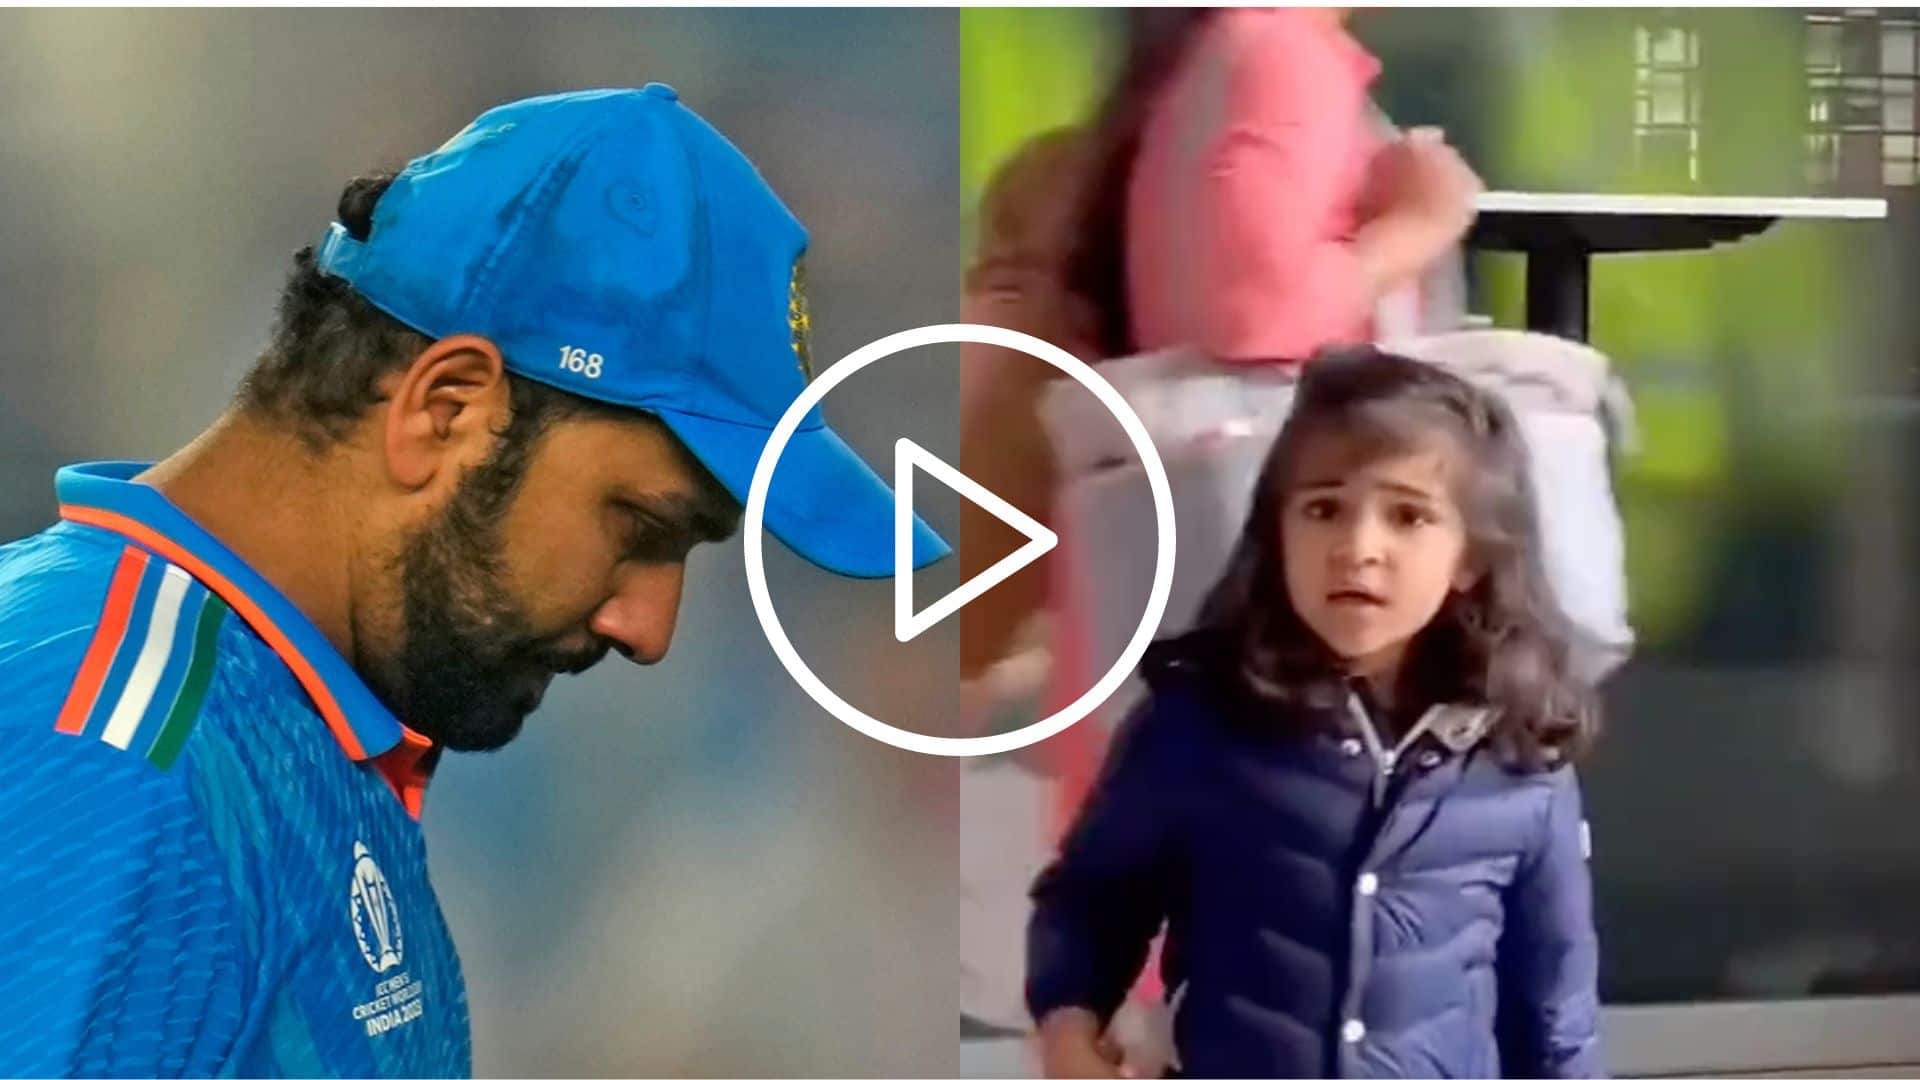 'After One Month, He'll Laugh Again' - Rohit Sharma's Daughter's Old Clip Goes Viral After WC Heartbreak